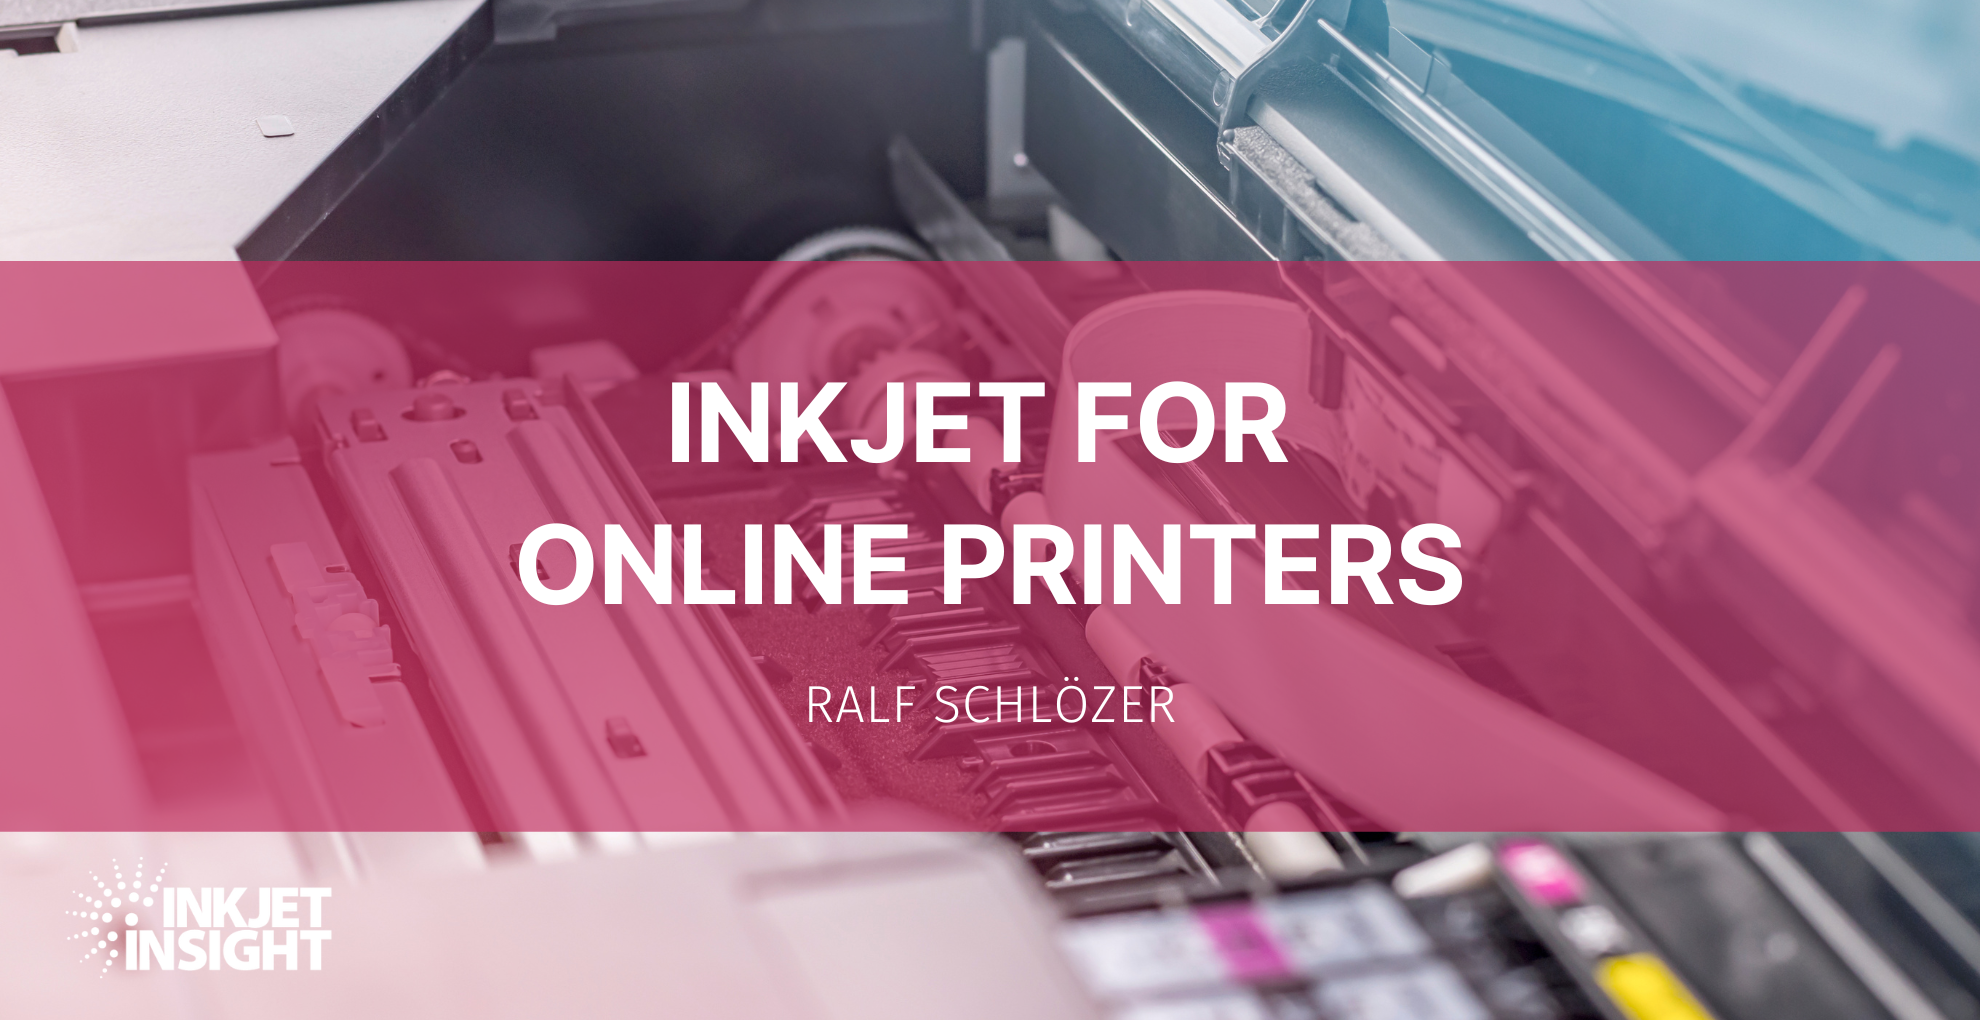 Featured image for “Inkjet for Online Printers”